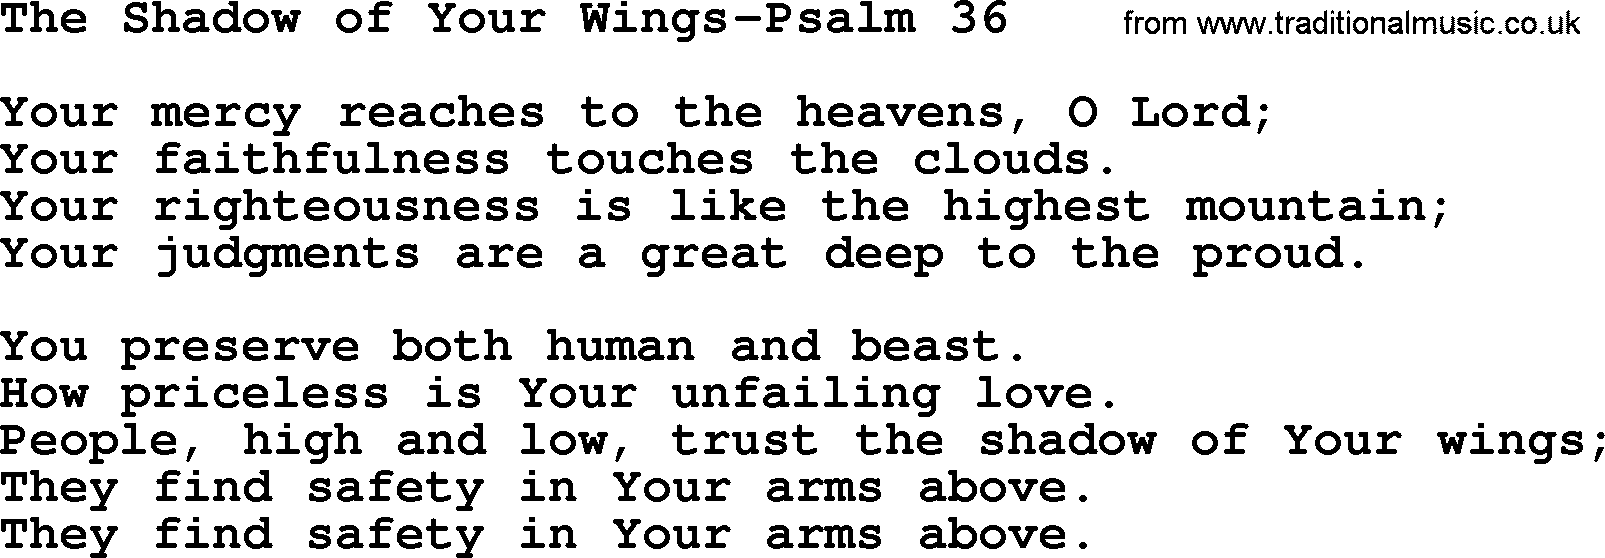 Hymns from the Psalms, Hymn: The Shadow Of Your Wings-Psalm 36, lyrics with PDF